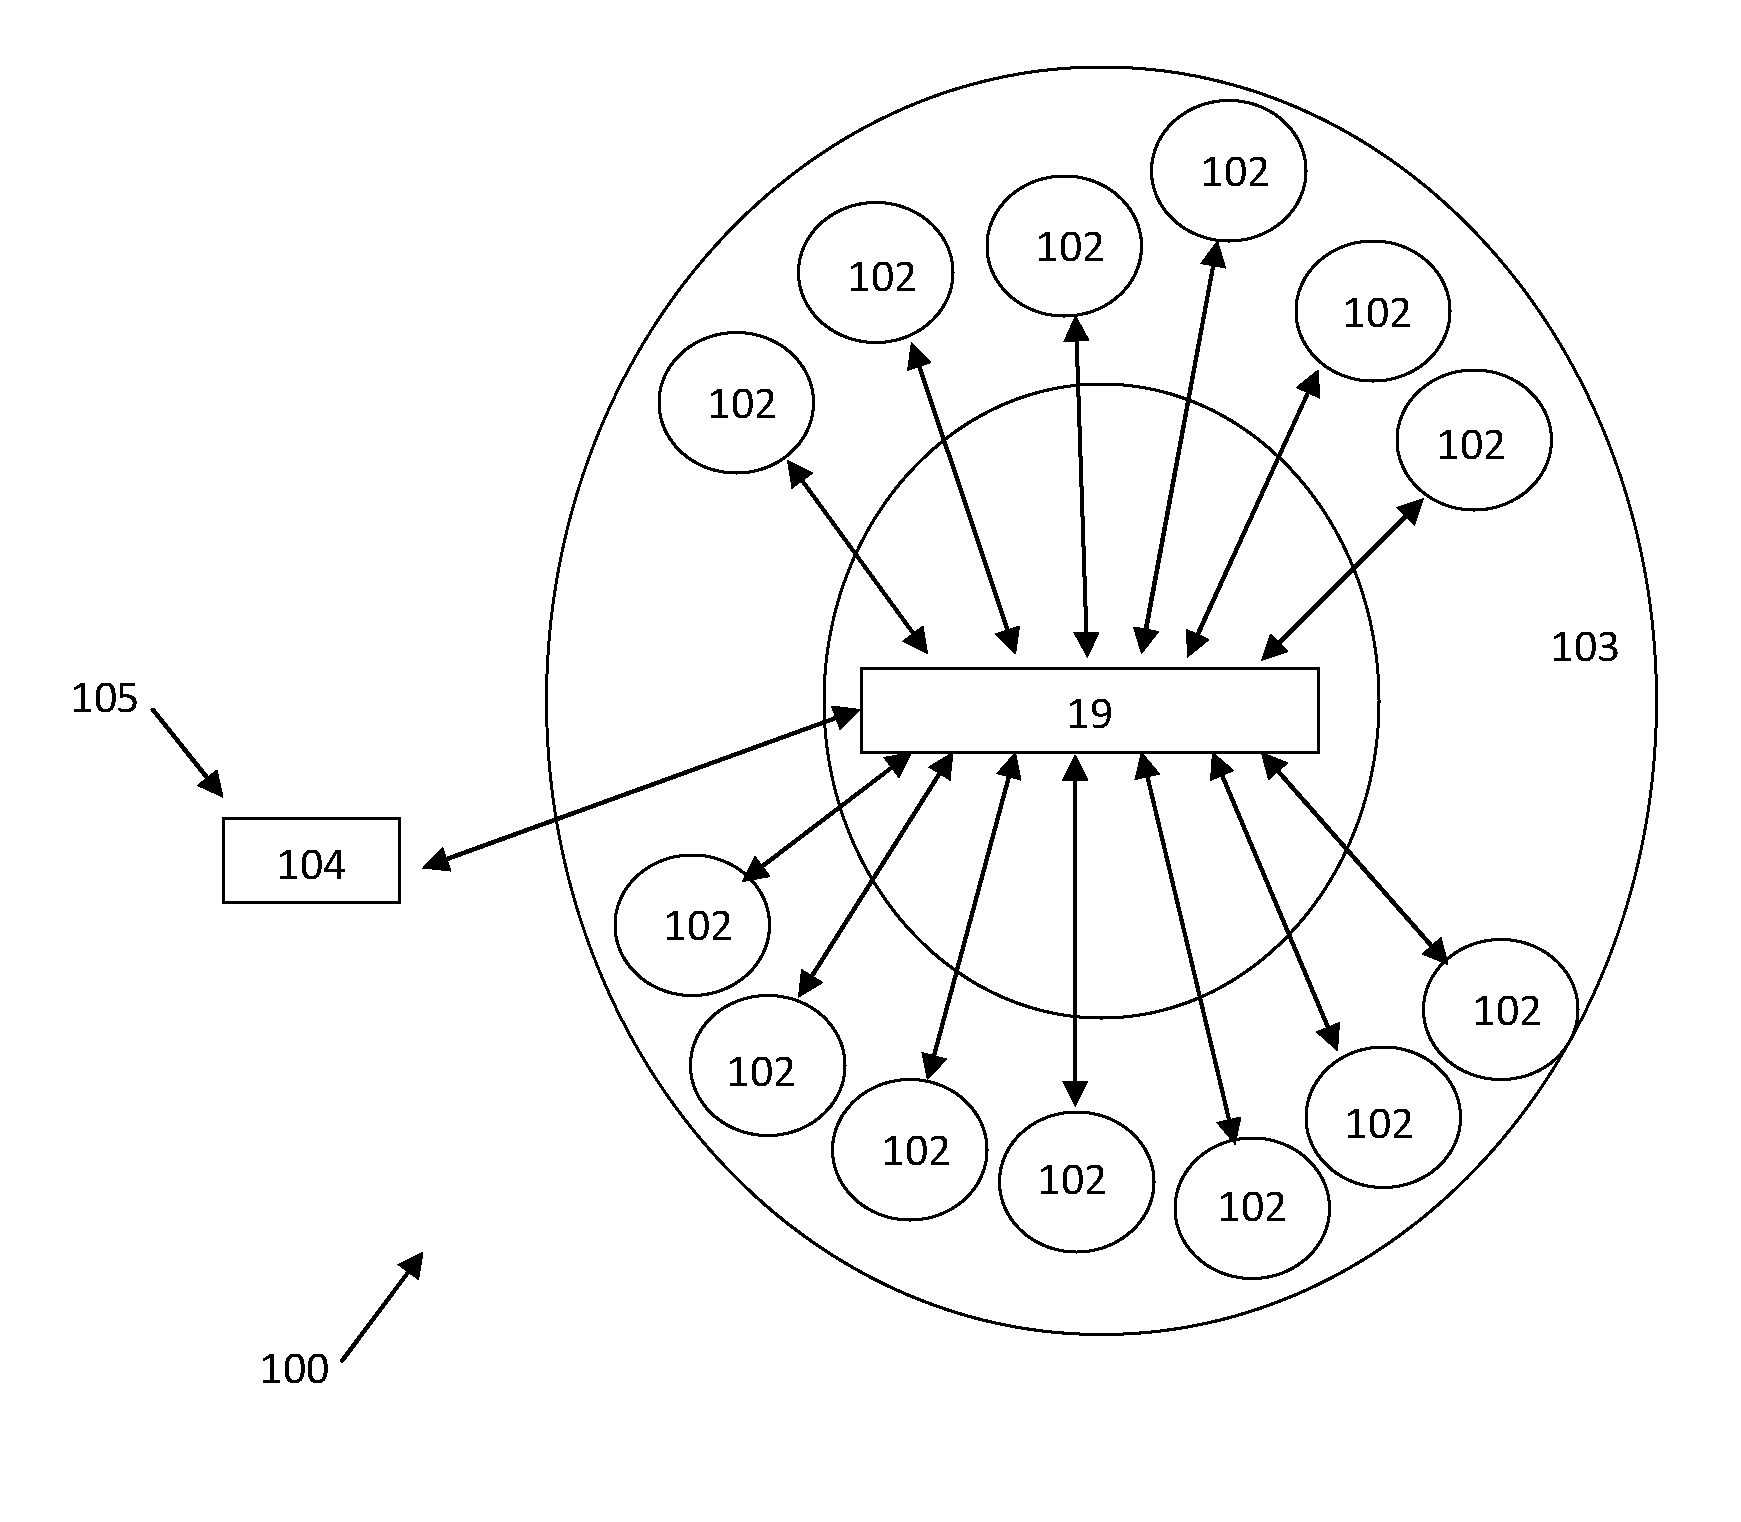 System and method for controlling privacy settings of user interface with internet applications